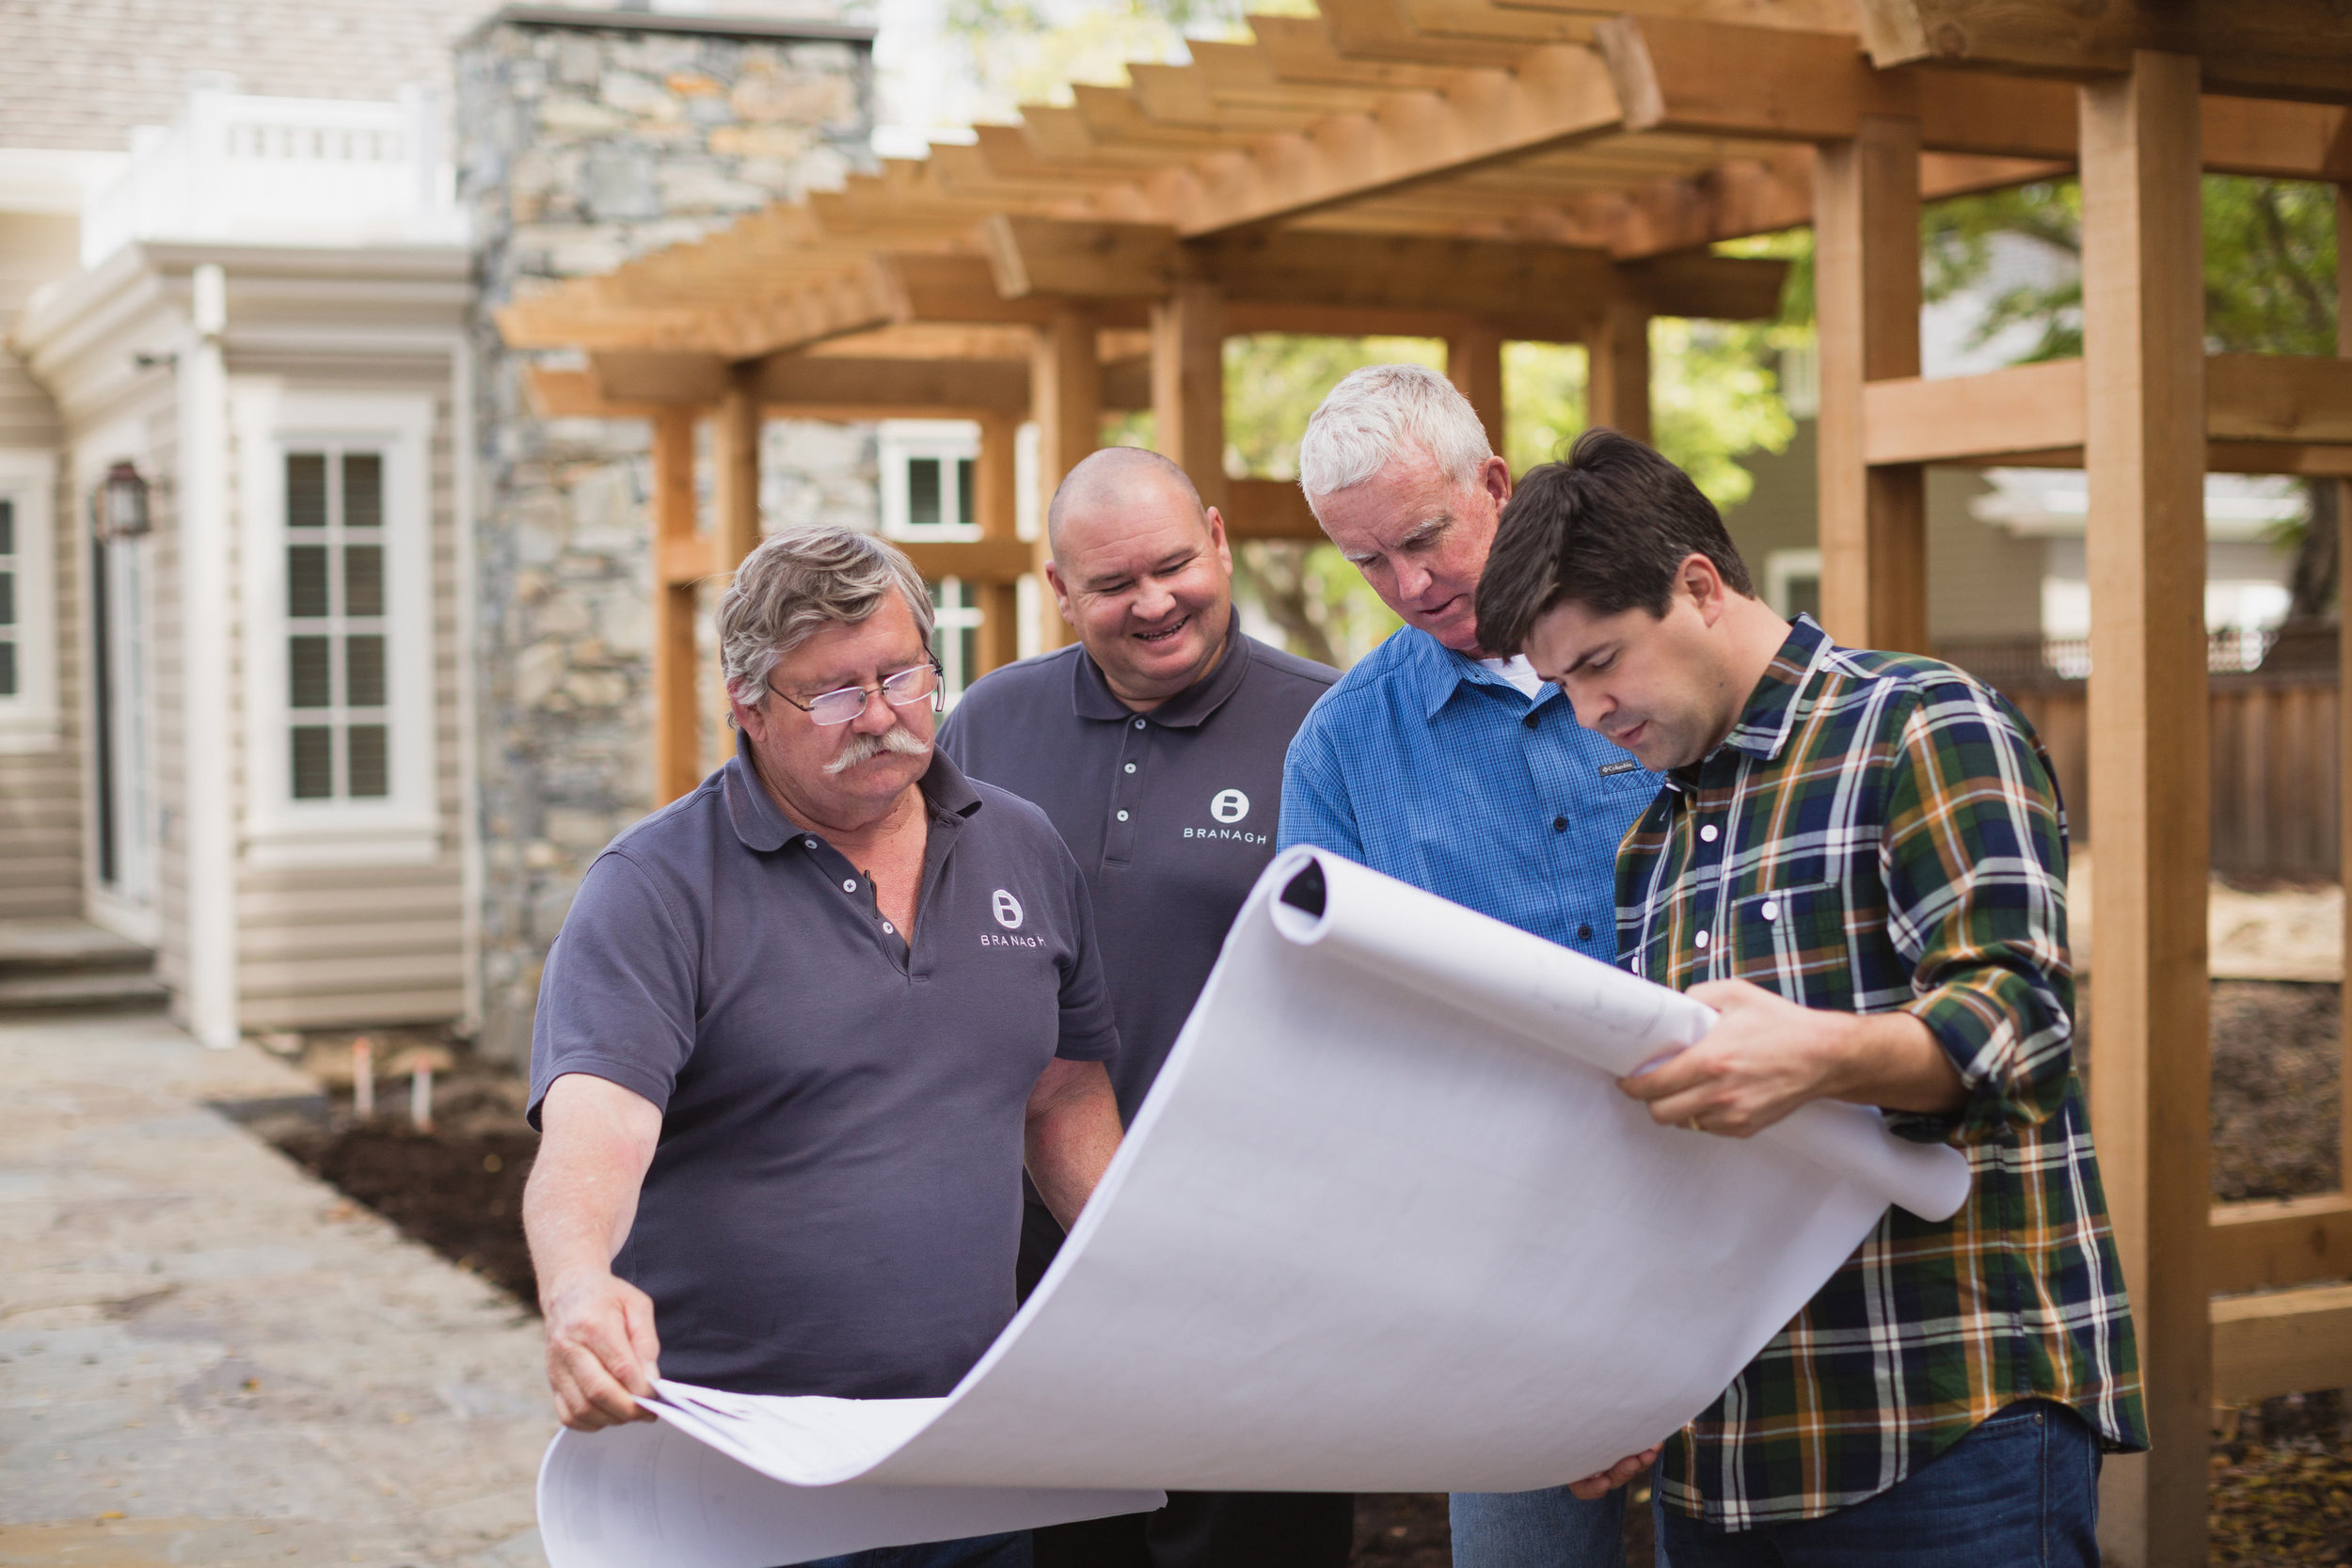 Branagh construction team at luxury home site